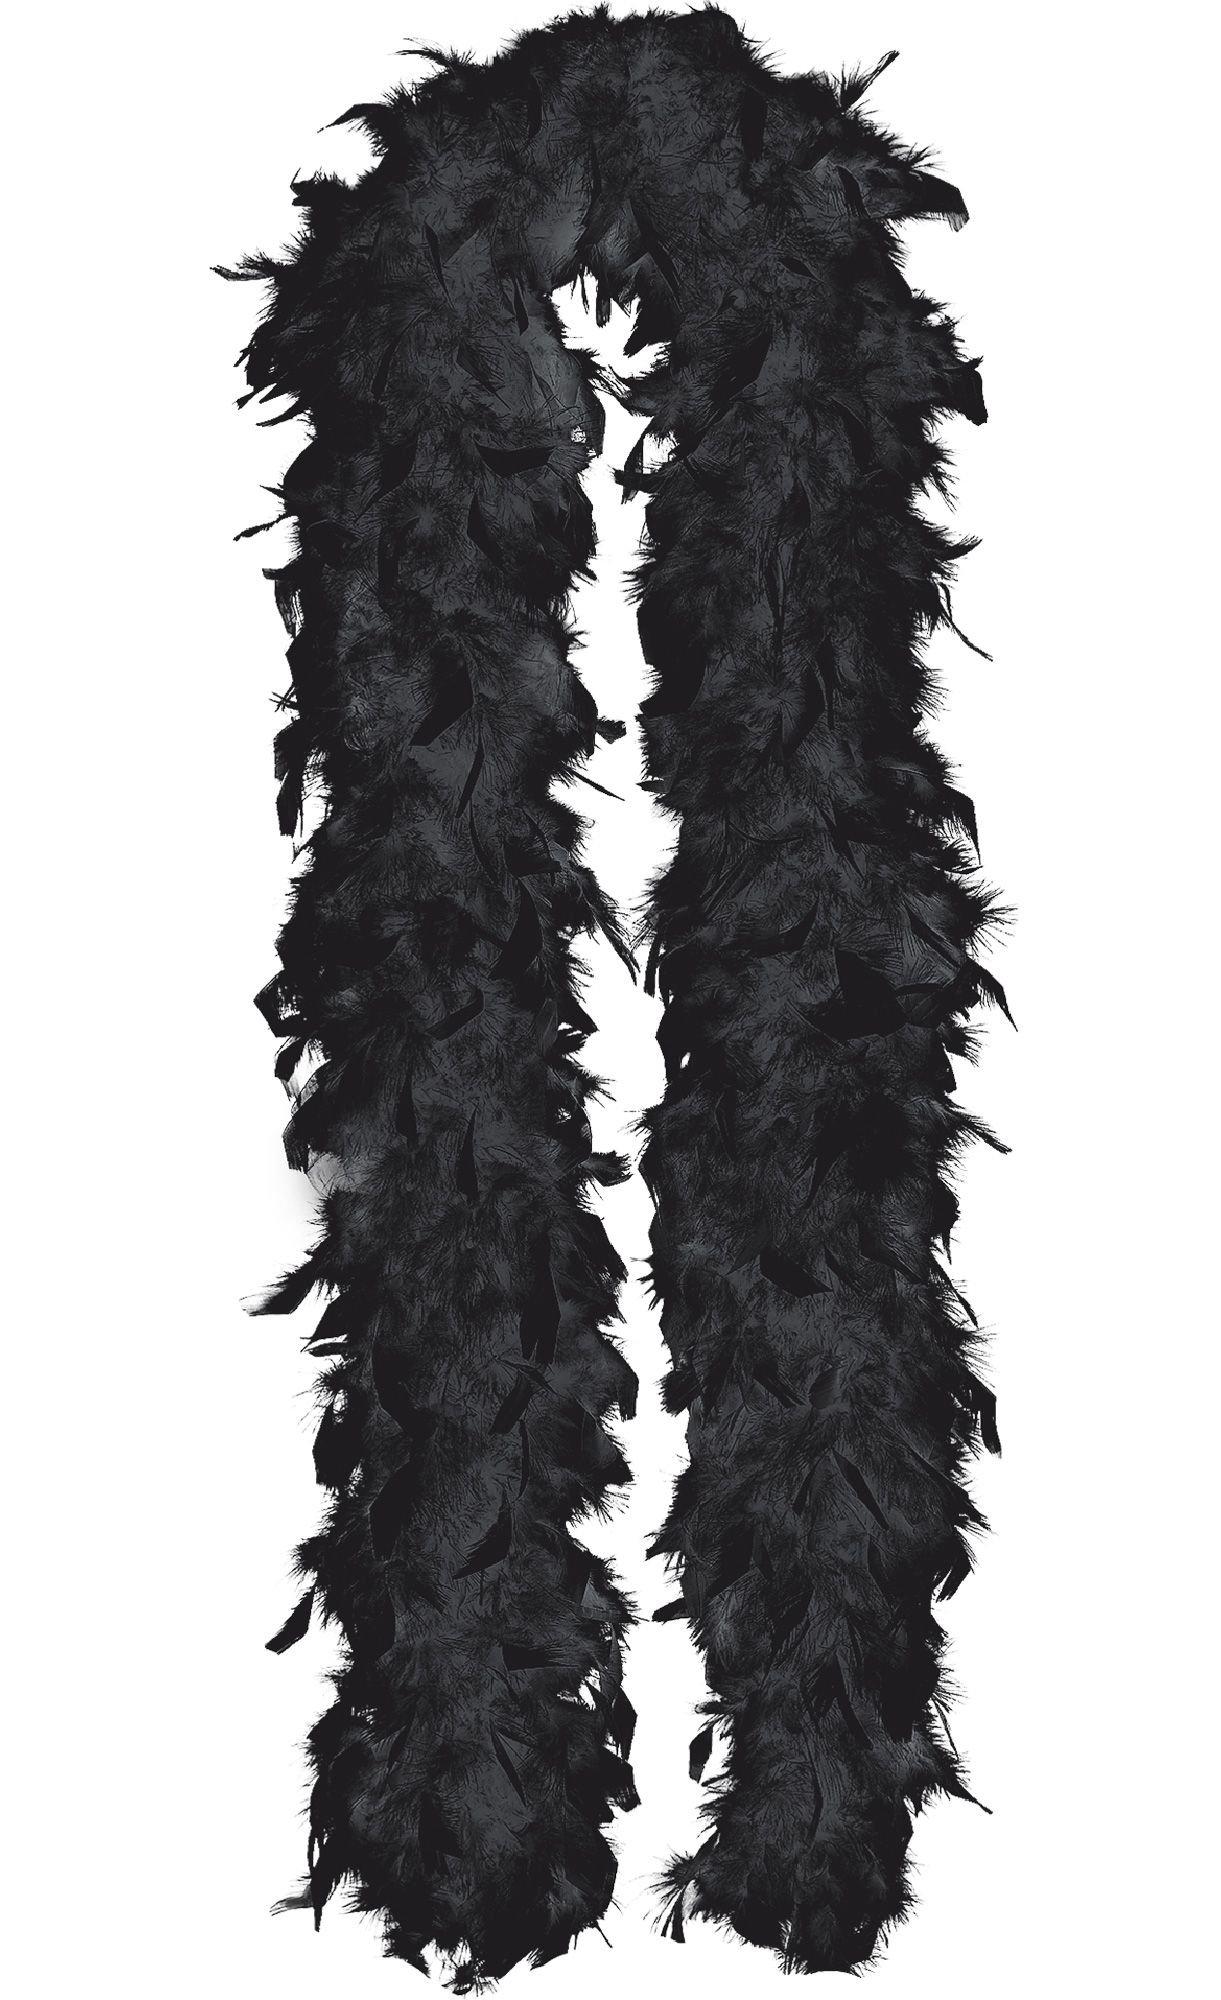 1 Ply Royal Blue Ostrich Feather Boa Boas Scarf Prom Halloween